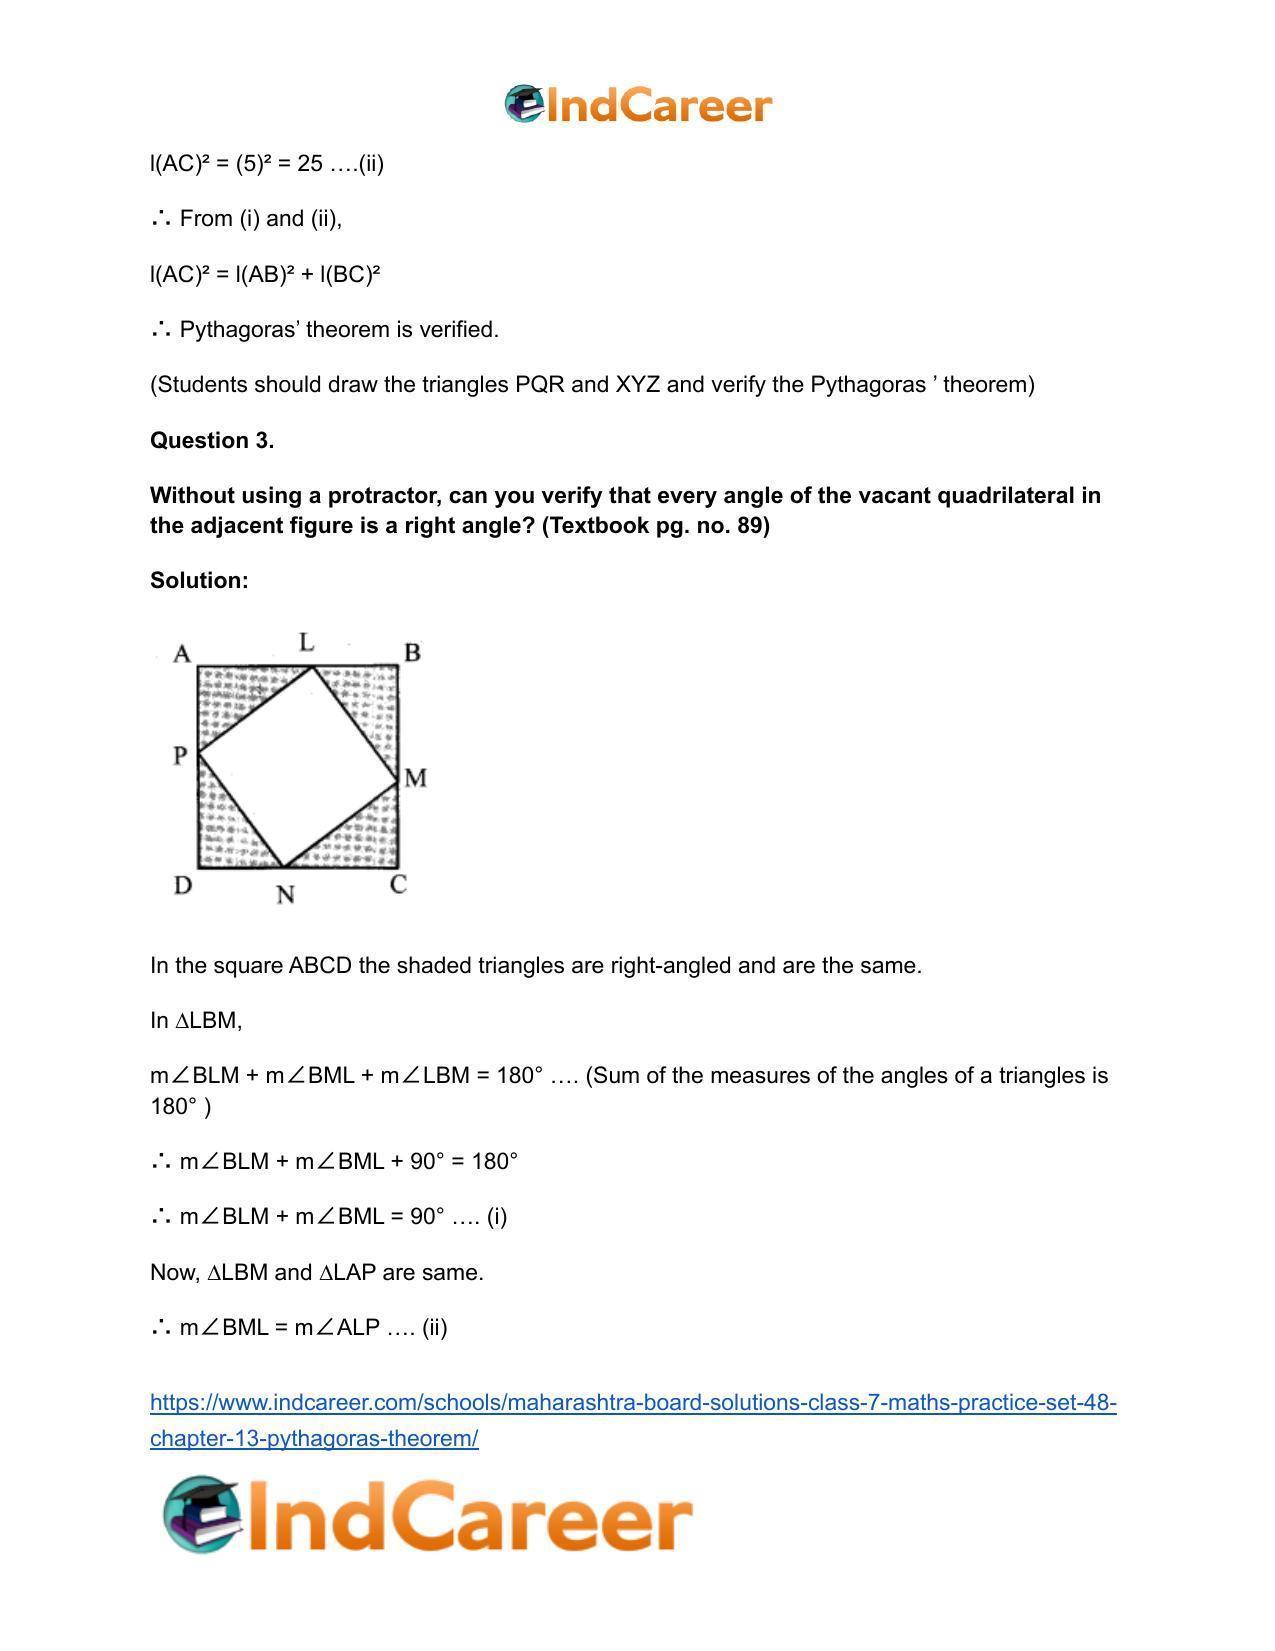 Maharashtra Board Solutions Class 7-Maths (Practice Set 48): Chapter 13- Pythagoras Theorem - Page 9